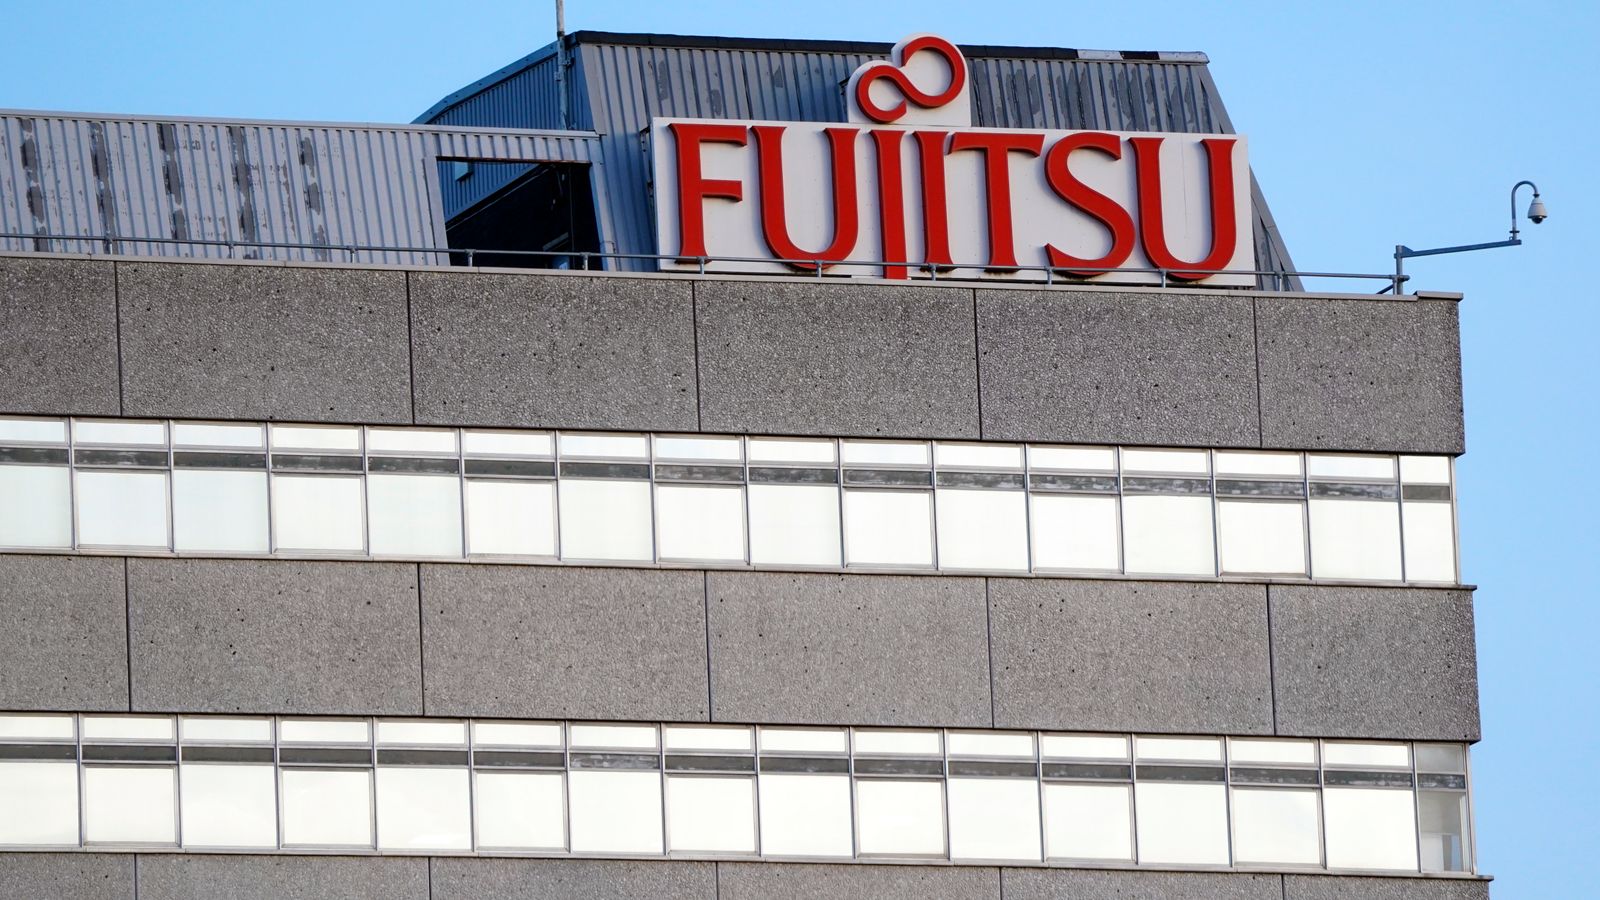 Fujitsu 'to have received £3.4bn in Treasury-linked deals active since 2019' despite role in Post Office scandal